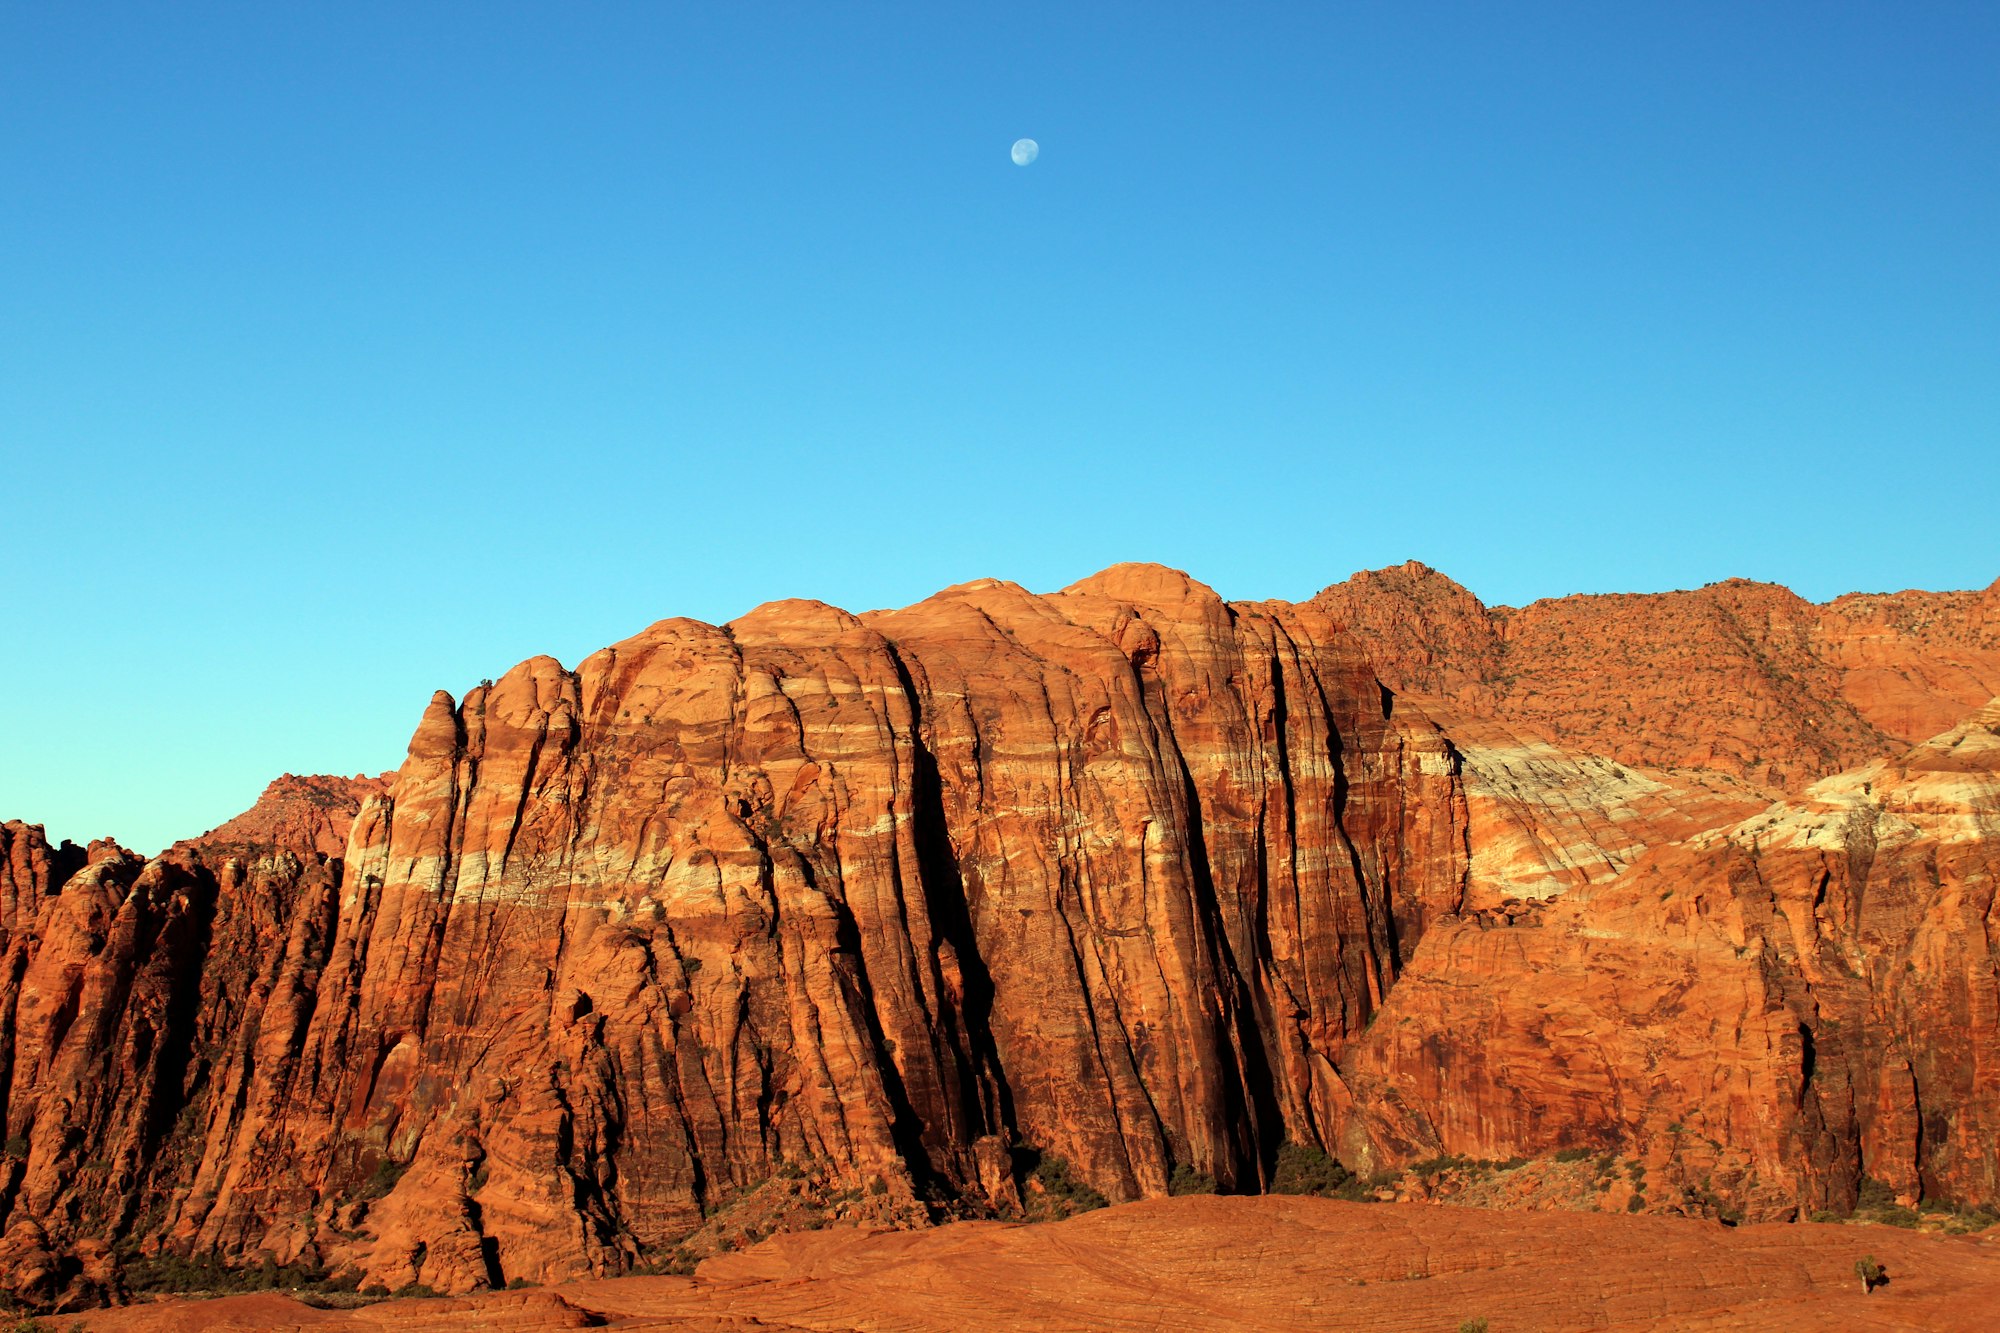 6 Things To Do In St. George, UT